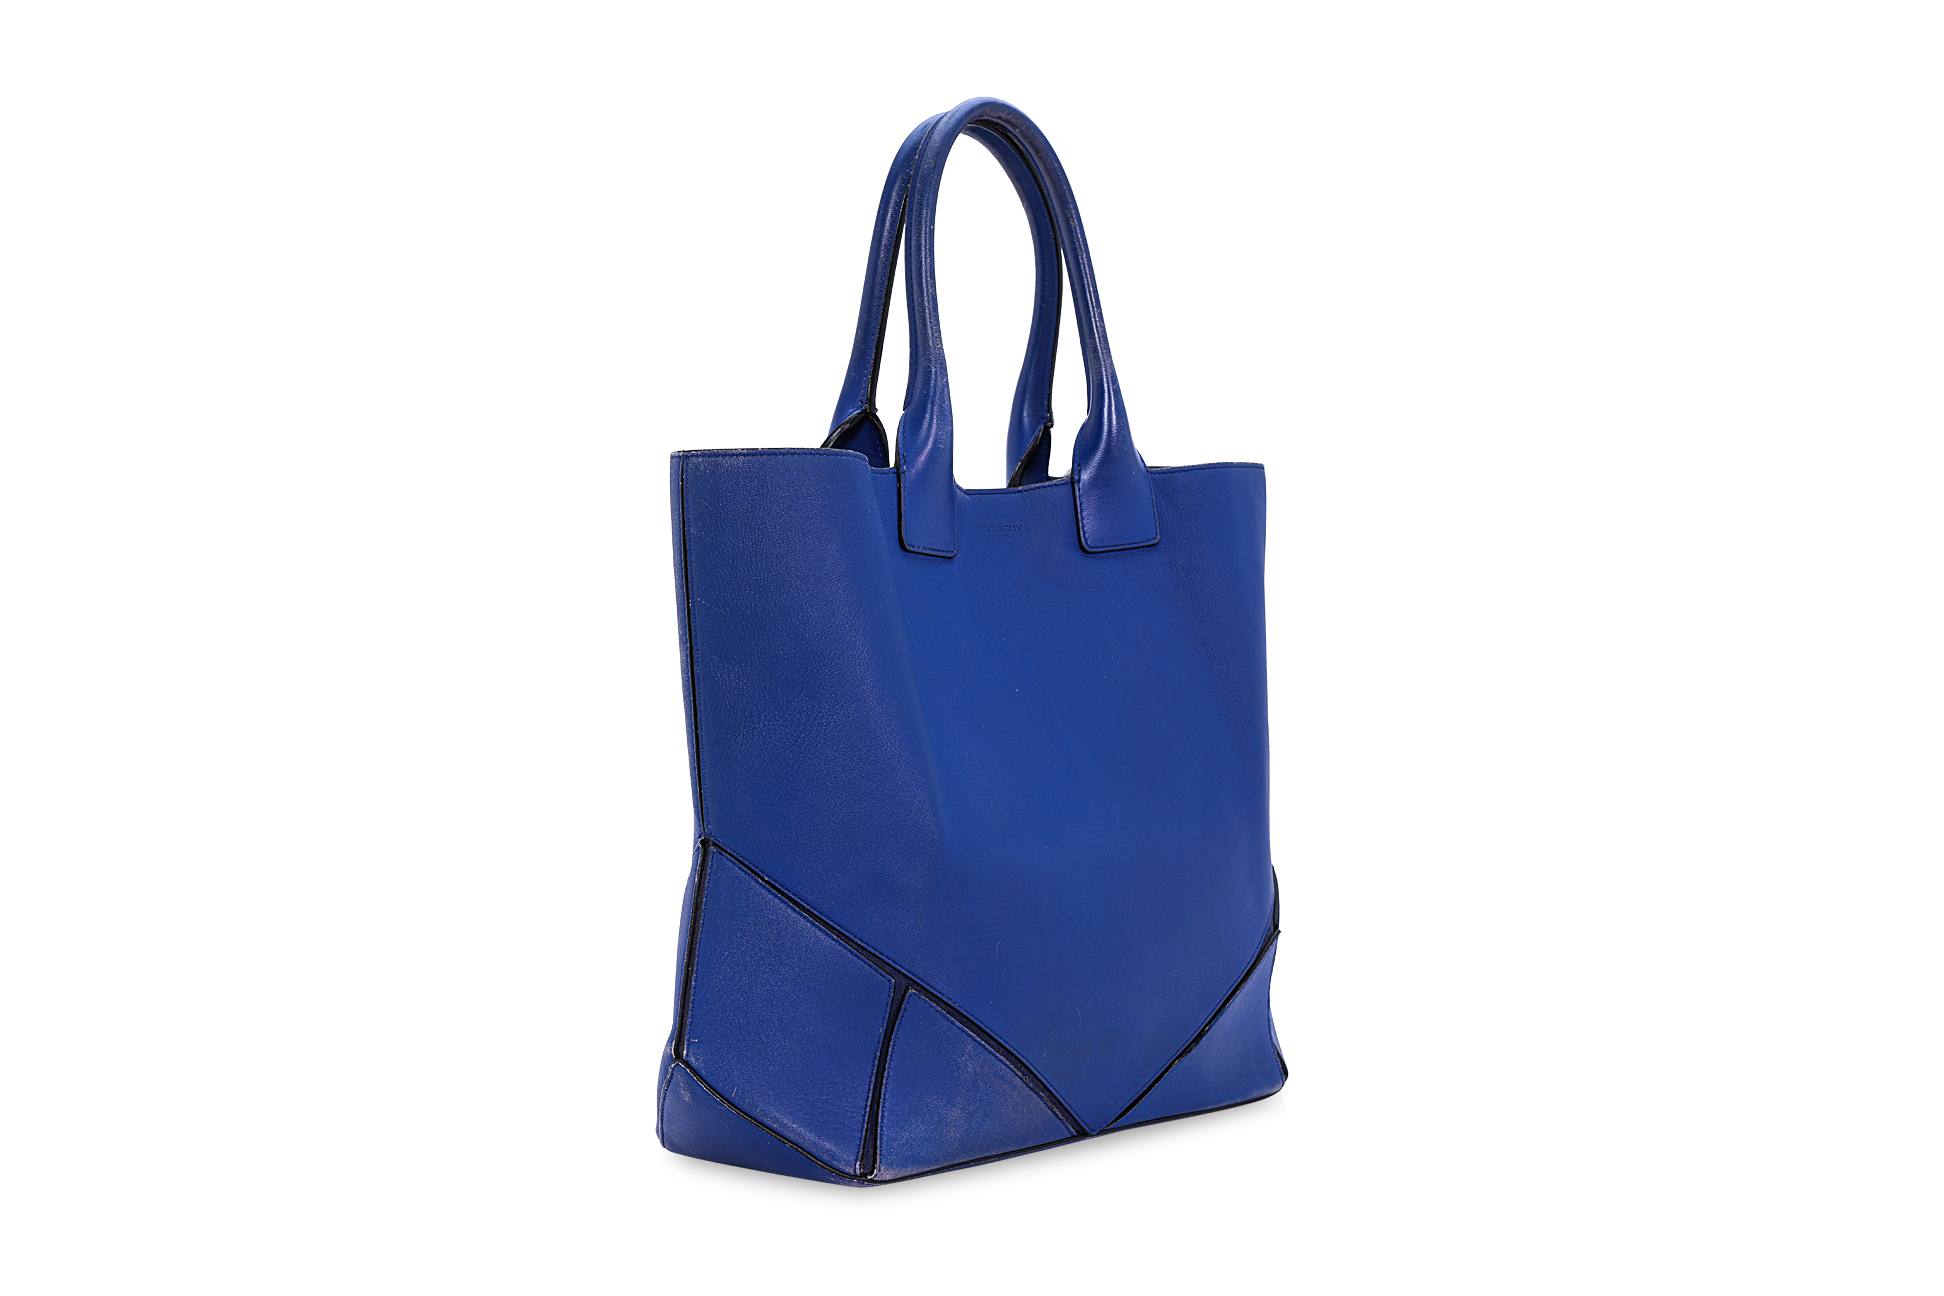 A GIVENCHY BLUE 'EASY' LEATHER TOTE BAG - Image 2 of 10